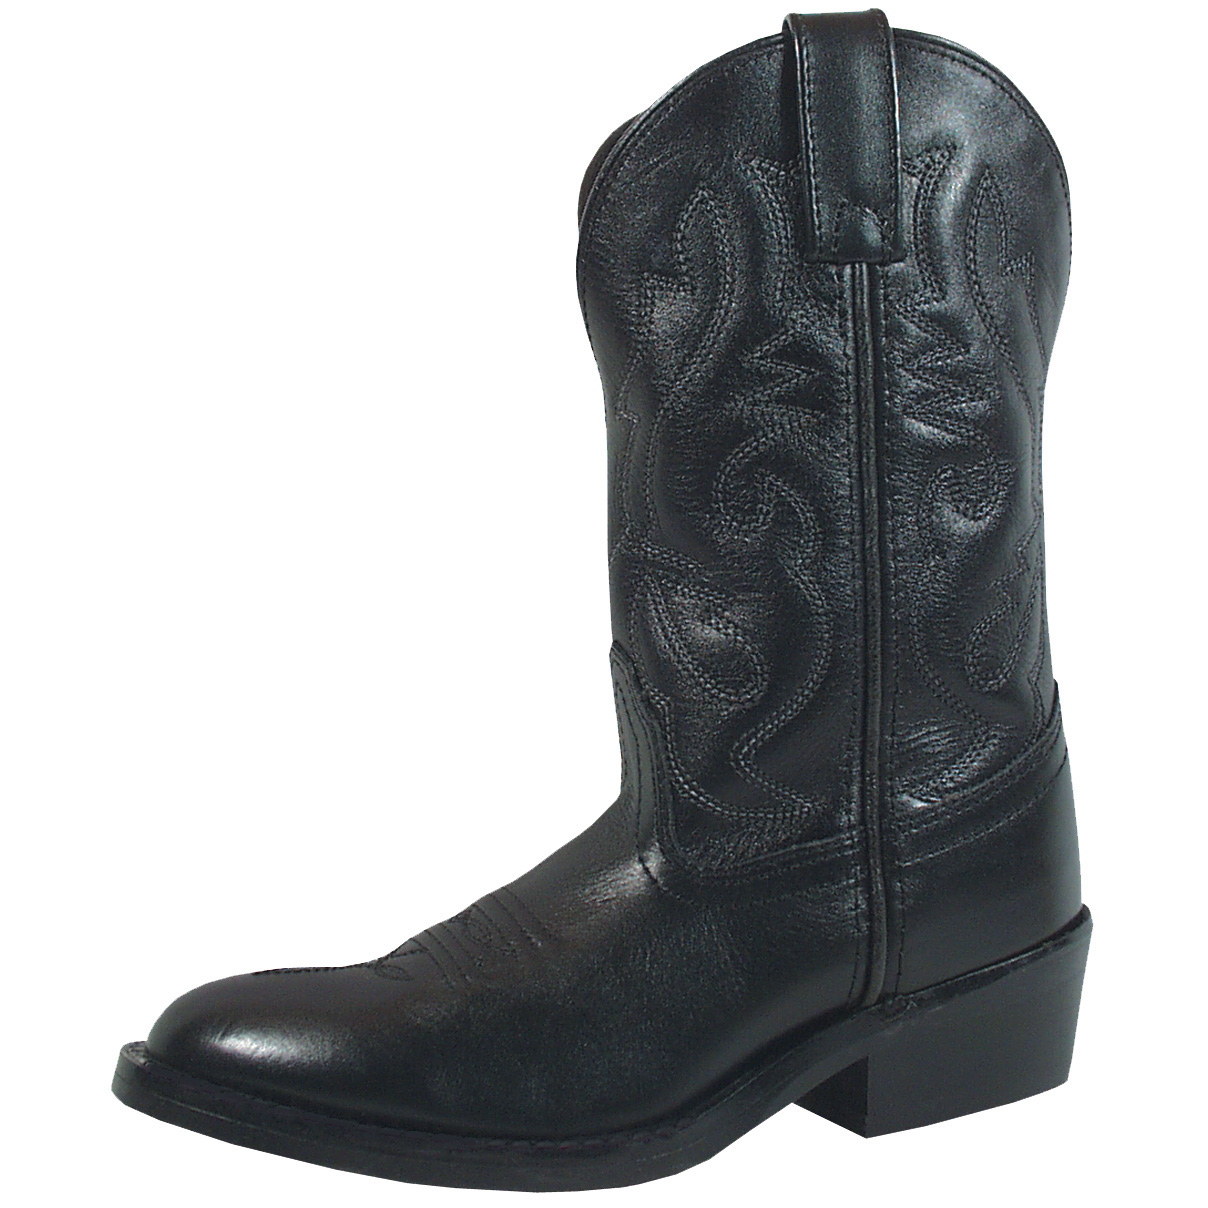 Smoky Mountain Boots Kid's Denver Black Leather Cowboy Boot